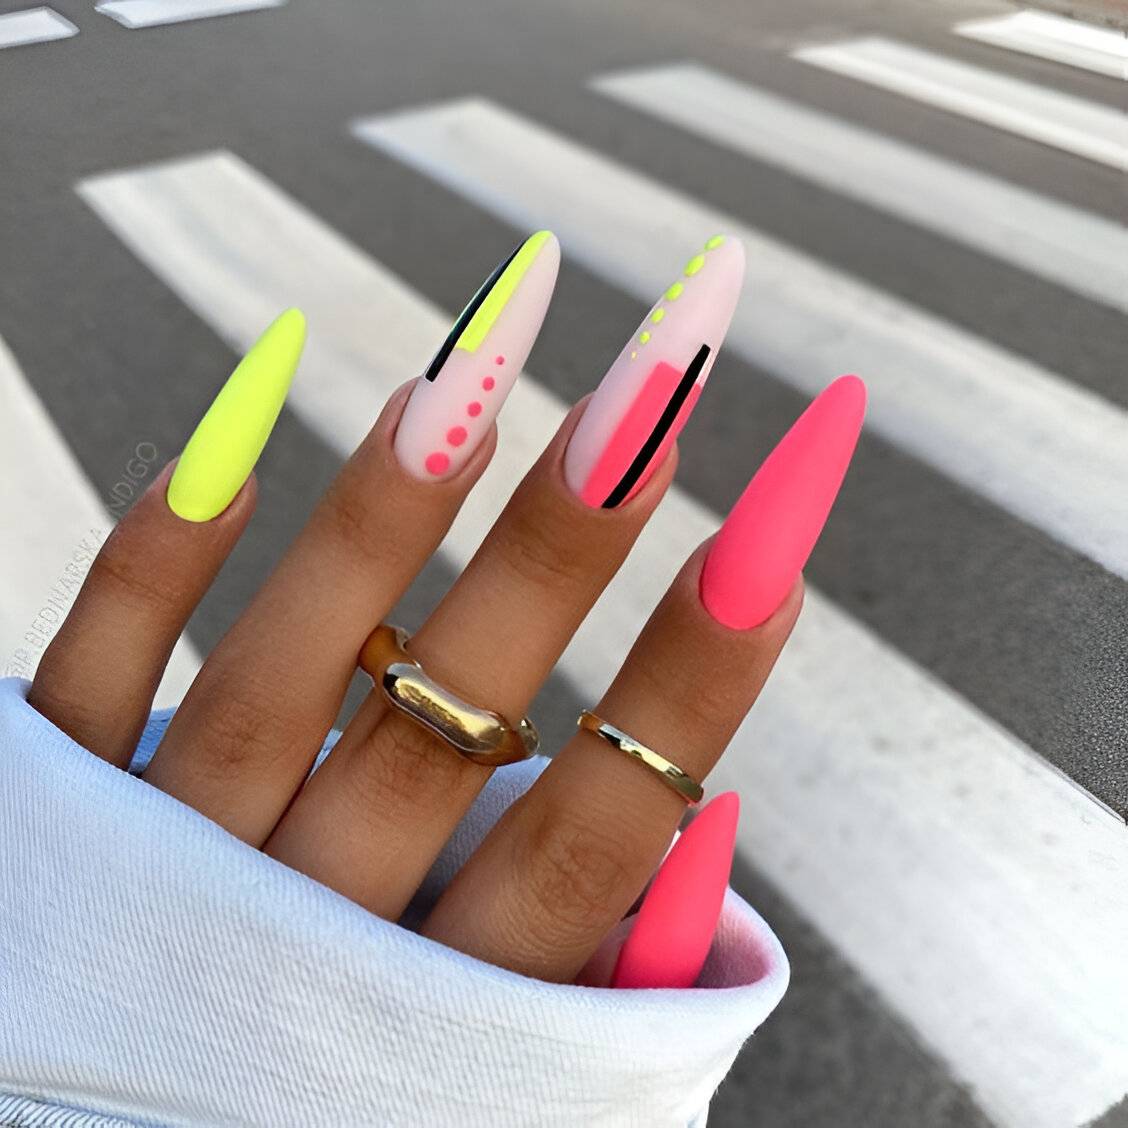 30 Colorful Nail Art Designs To Have Fun And Stay Fabulous - 233